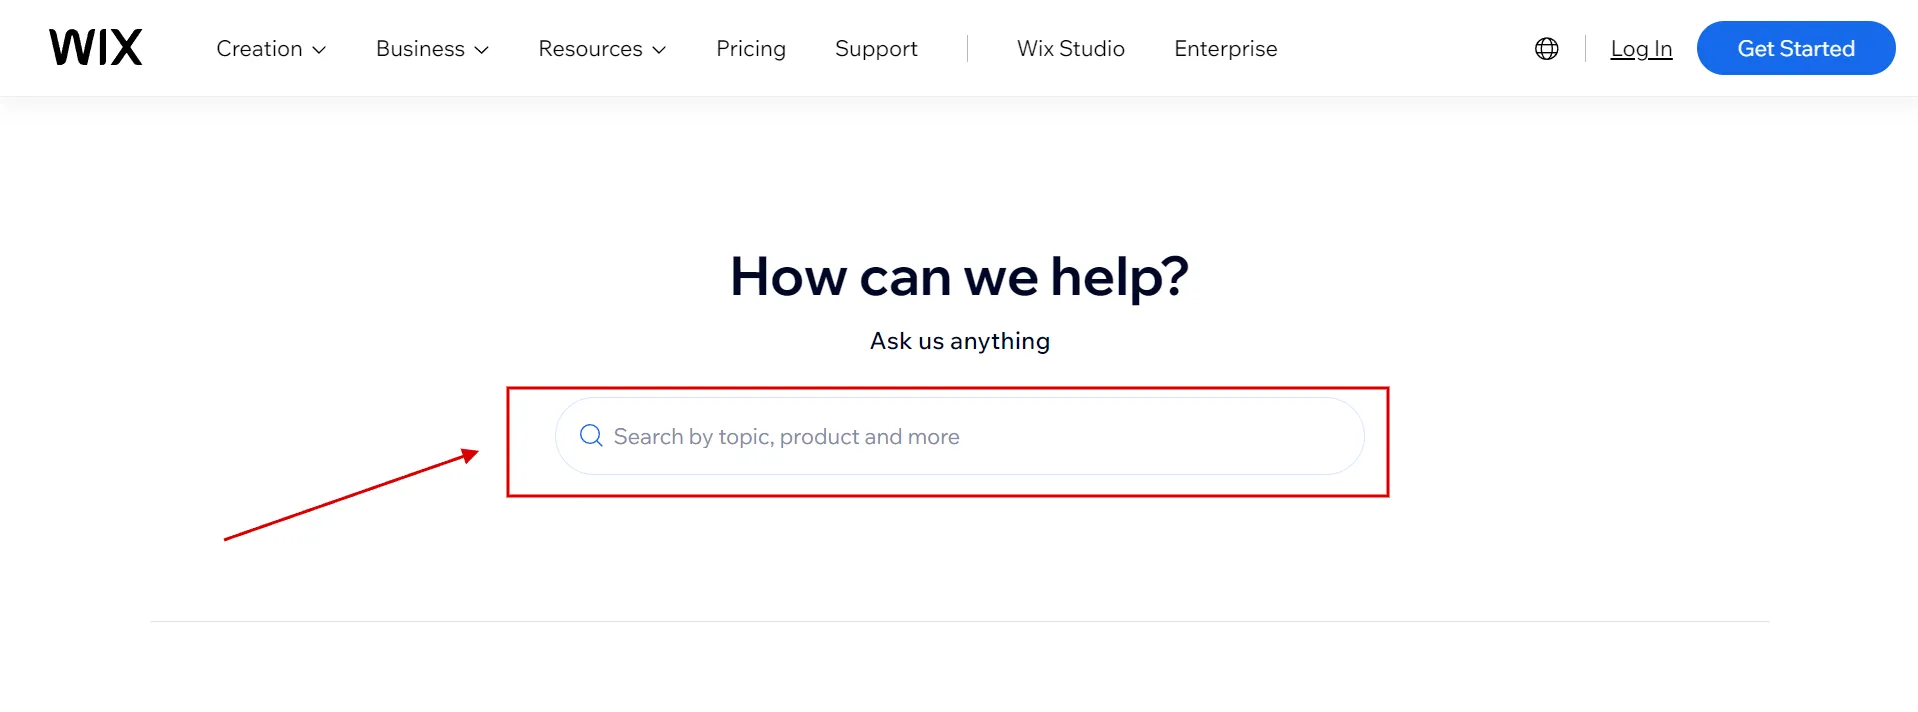 Search by topic and product to find your solution